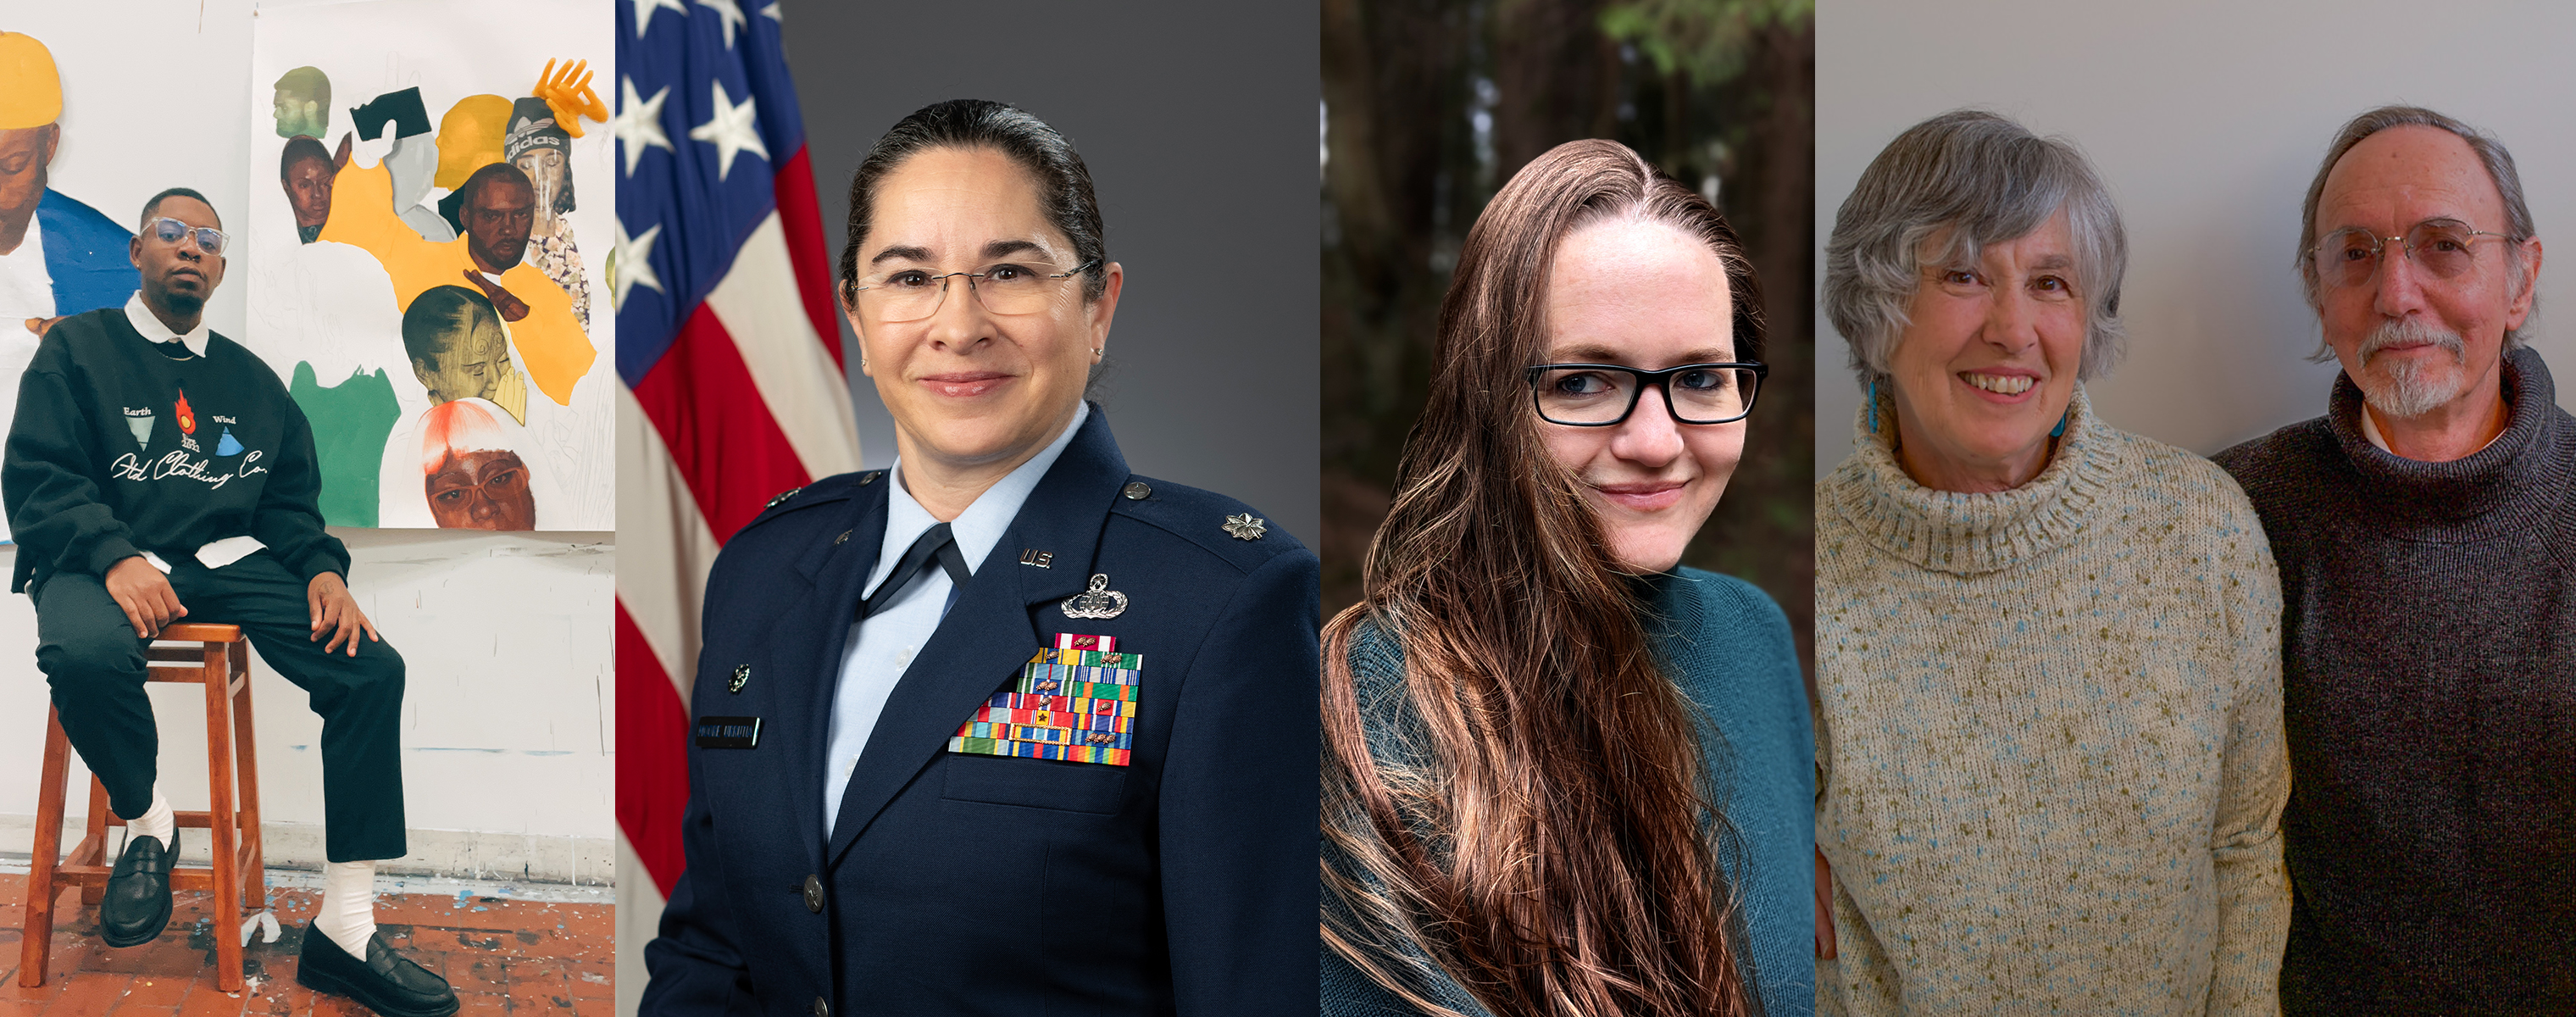 The recipients of the annual Alumni Board Awards include (left to right) Adrian Armstrong, Lt. Col. Cristina Moore Urrutia, Katie Williams, and Patrick Grim and Terri Watkins. Courtesy photos.